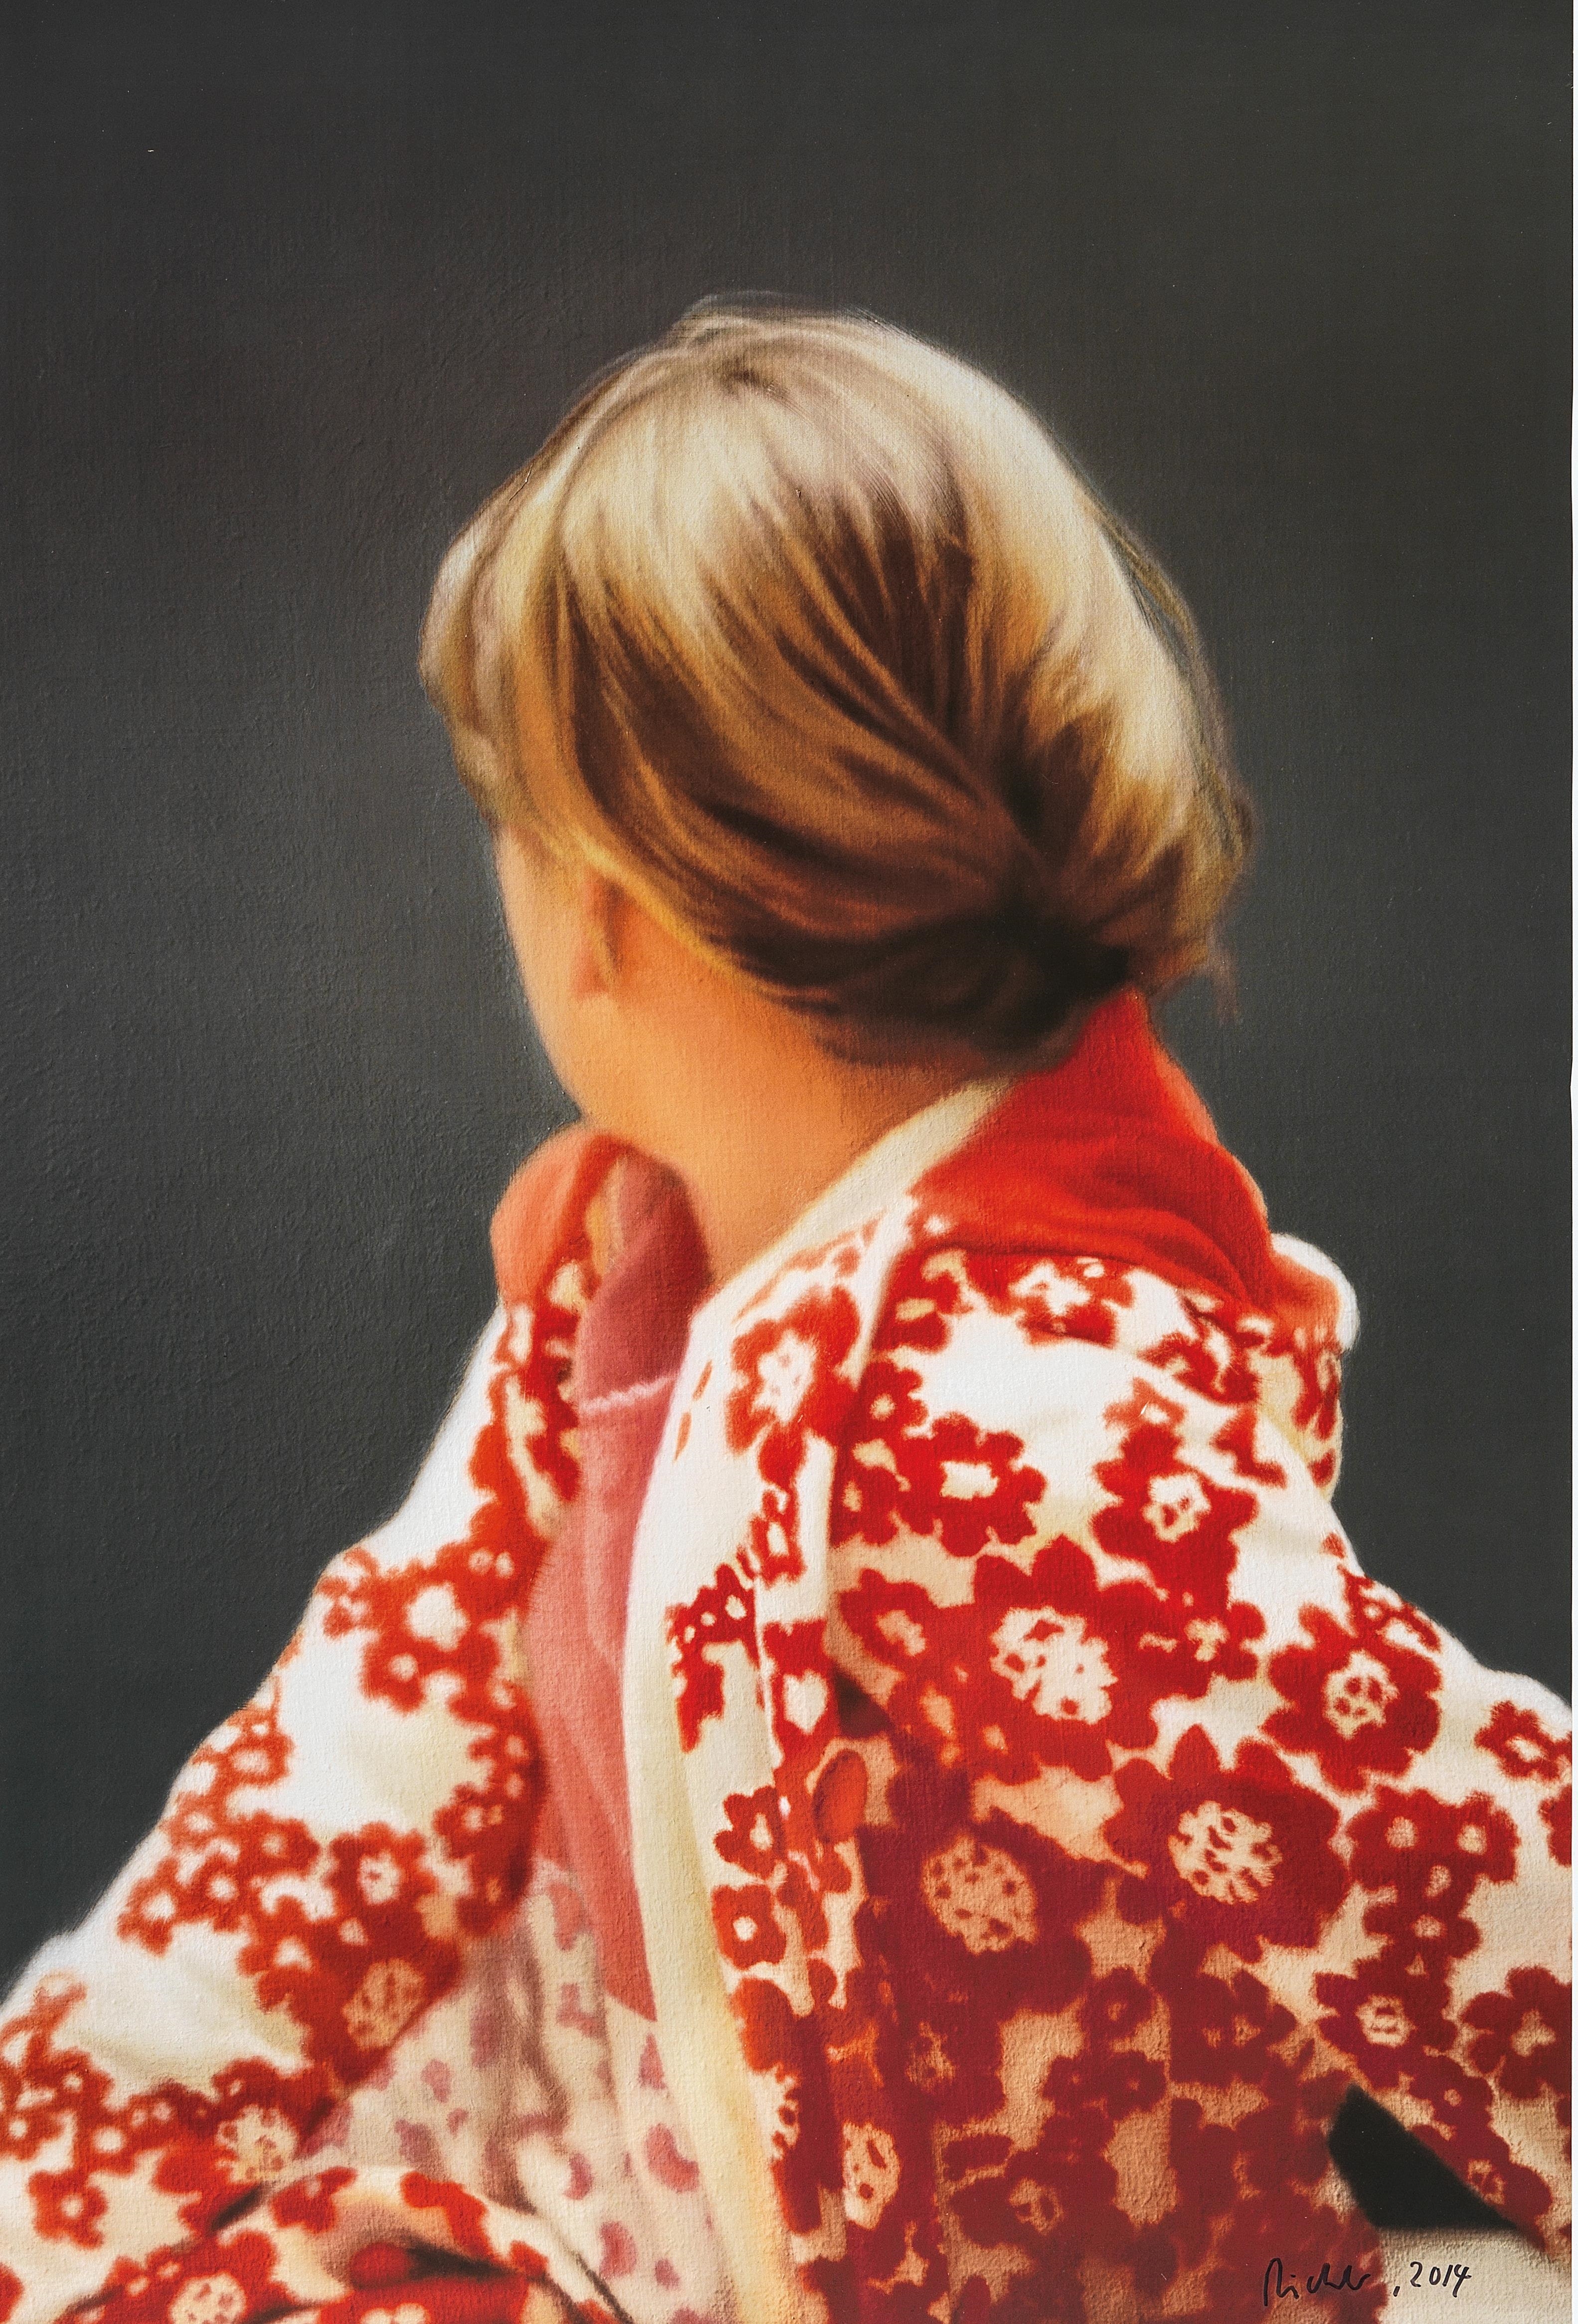 Artwork by Gerhard Richter, Betty, 2014, Made of coloured offset print on lightweight white cardboard, covered with transparent lacquer, laid down on white plastic board